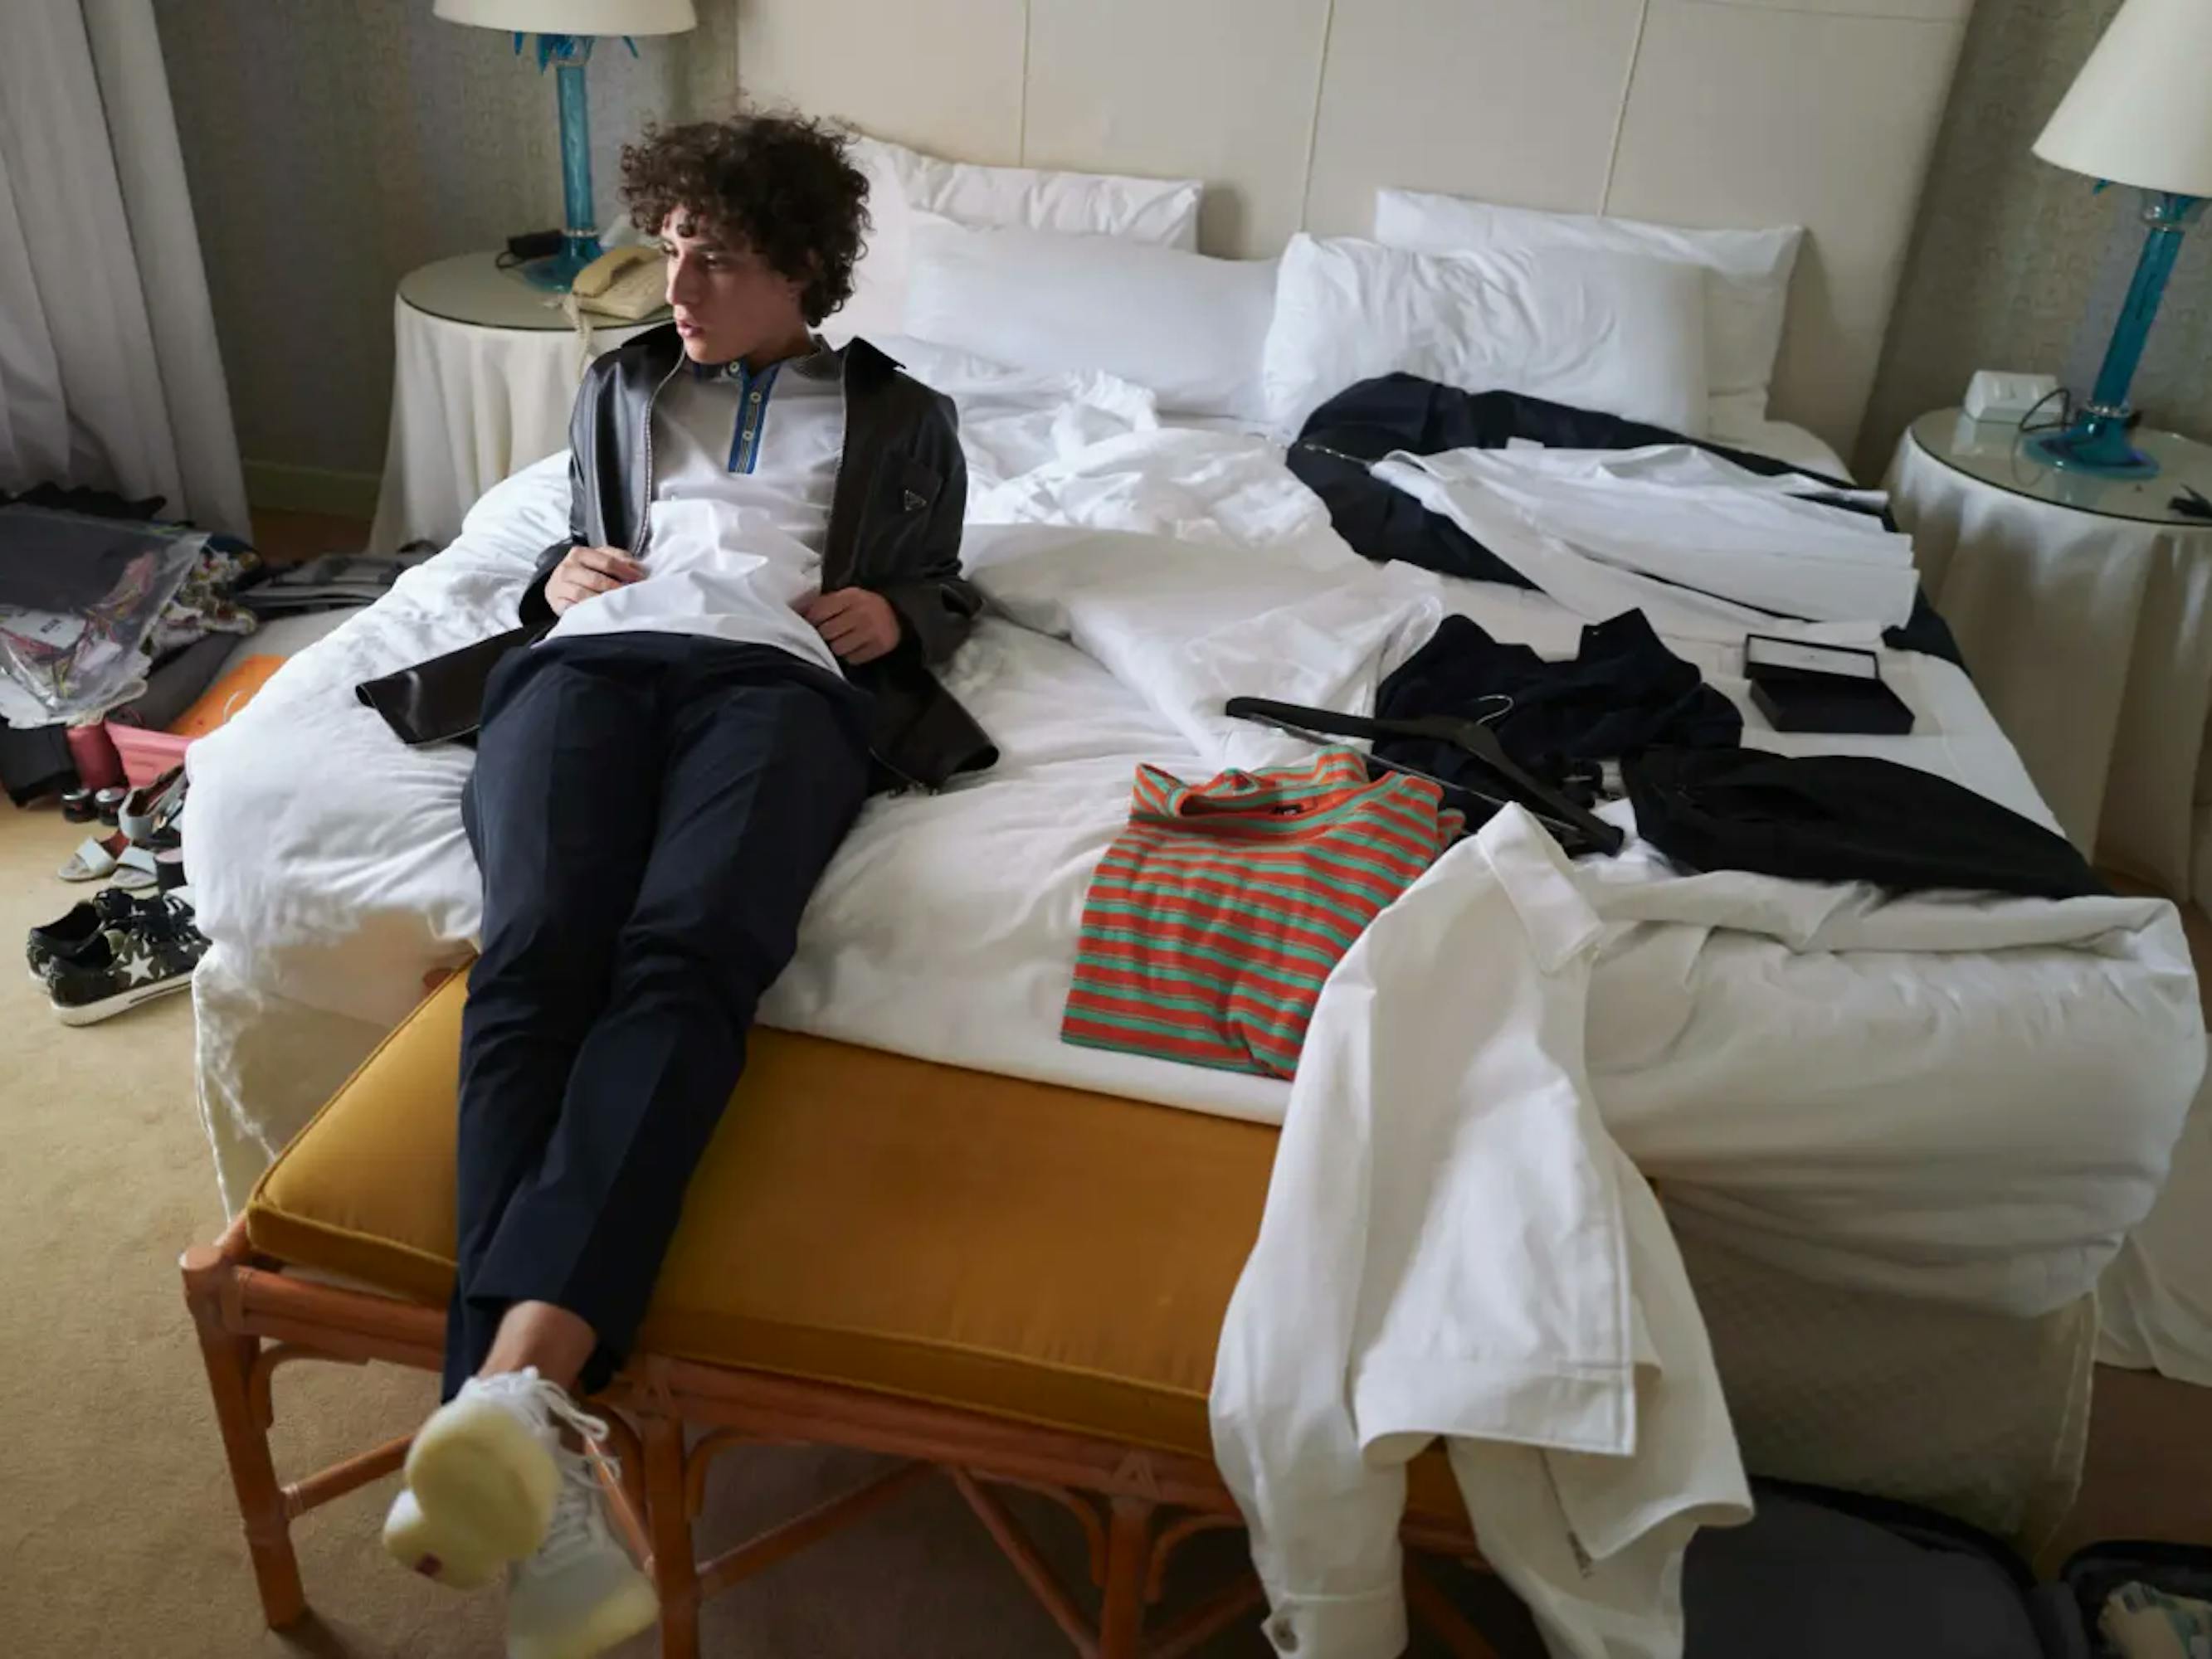 Filippo Scotti wears part of a suit as he reclines on a white bed. There are clothes strewn about on the mattress and floor, and he looks absentmindedly off to the side. If it weren’t for the tux and imminent Venice film festival award, he would seem like a regular teenage boy.